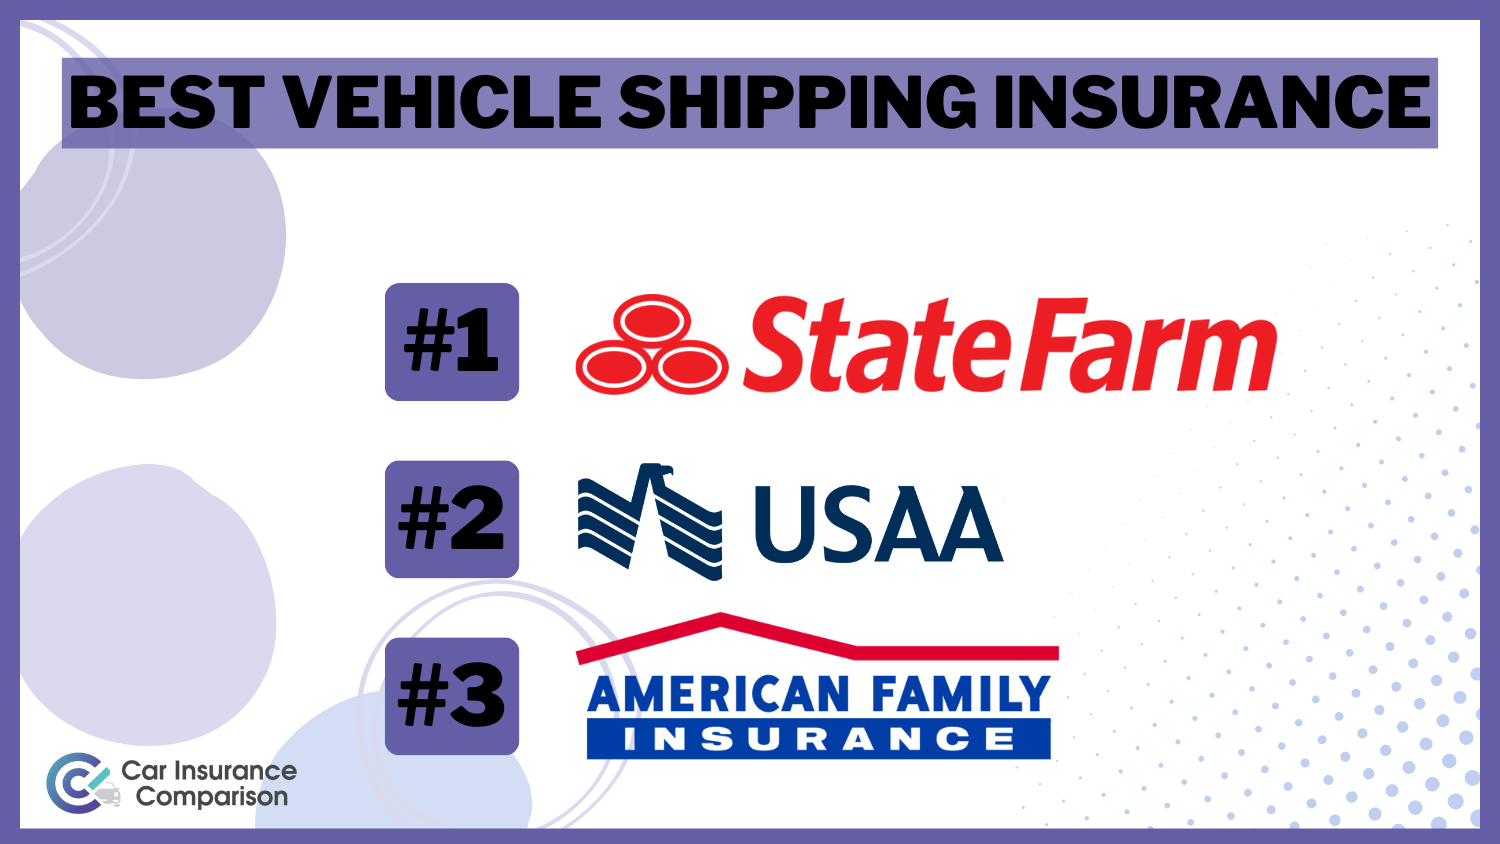 Best Vehicle Shipping Insurance: State Farm, USAA, American Family